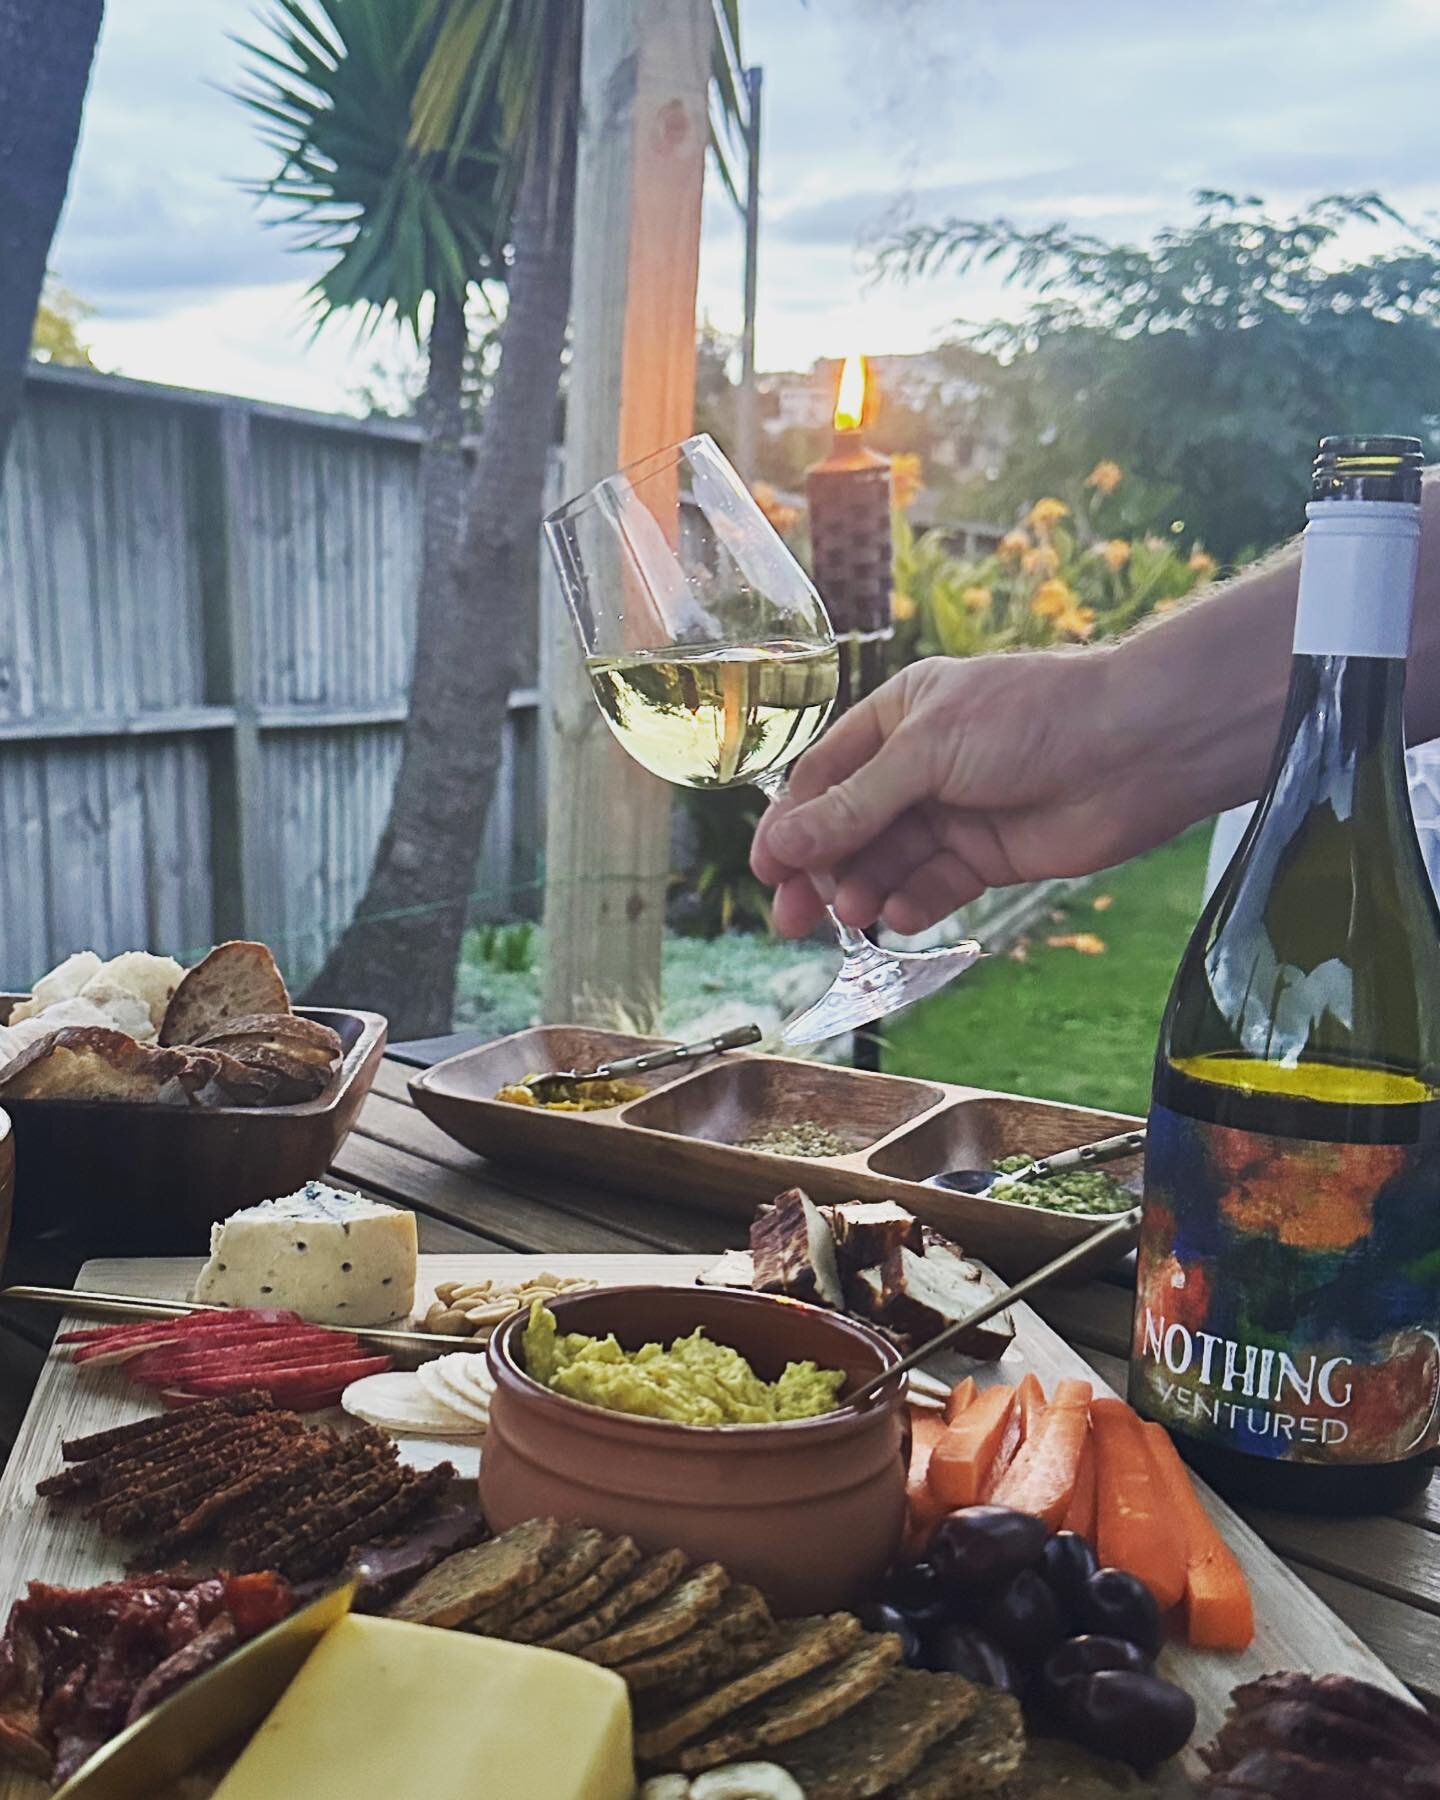 Local produce at its best 😋😍

We enjoyed a beautiful platter this evening .. love your work @pigandsalt @thegoodnessgardennz @yeast.coastbakingco @tematafigs

Nothing Ventured Chardonnay 

Come and see us all each week at the @napierurbanfarmersmar